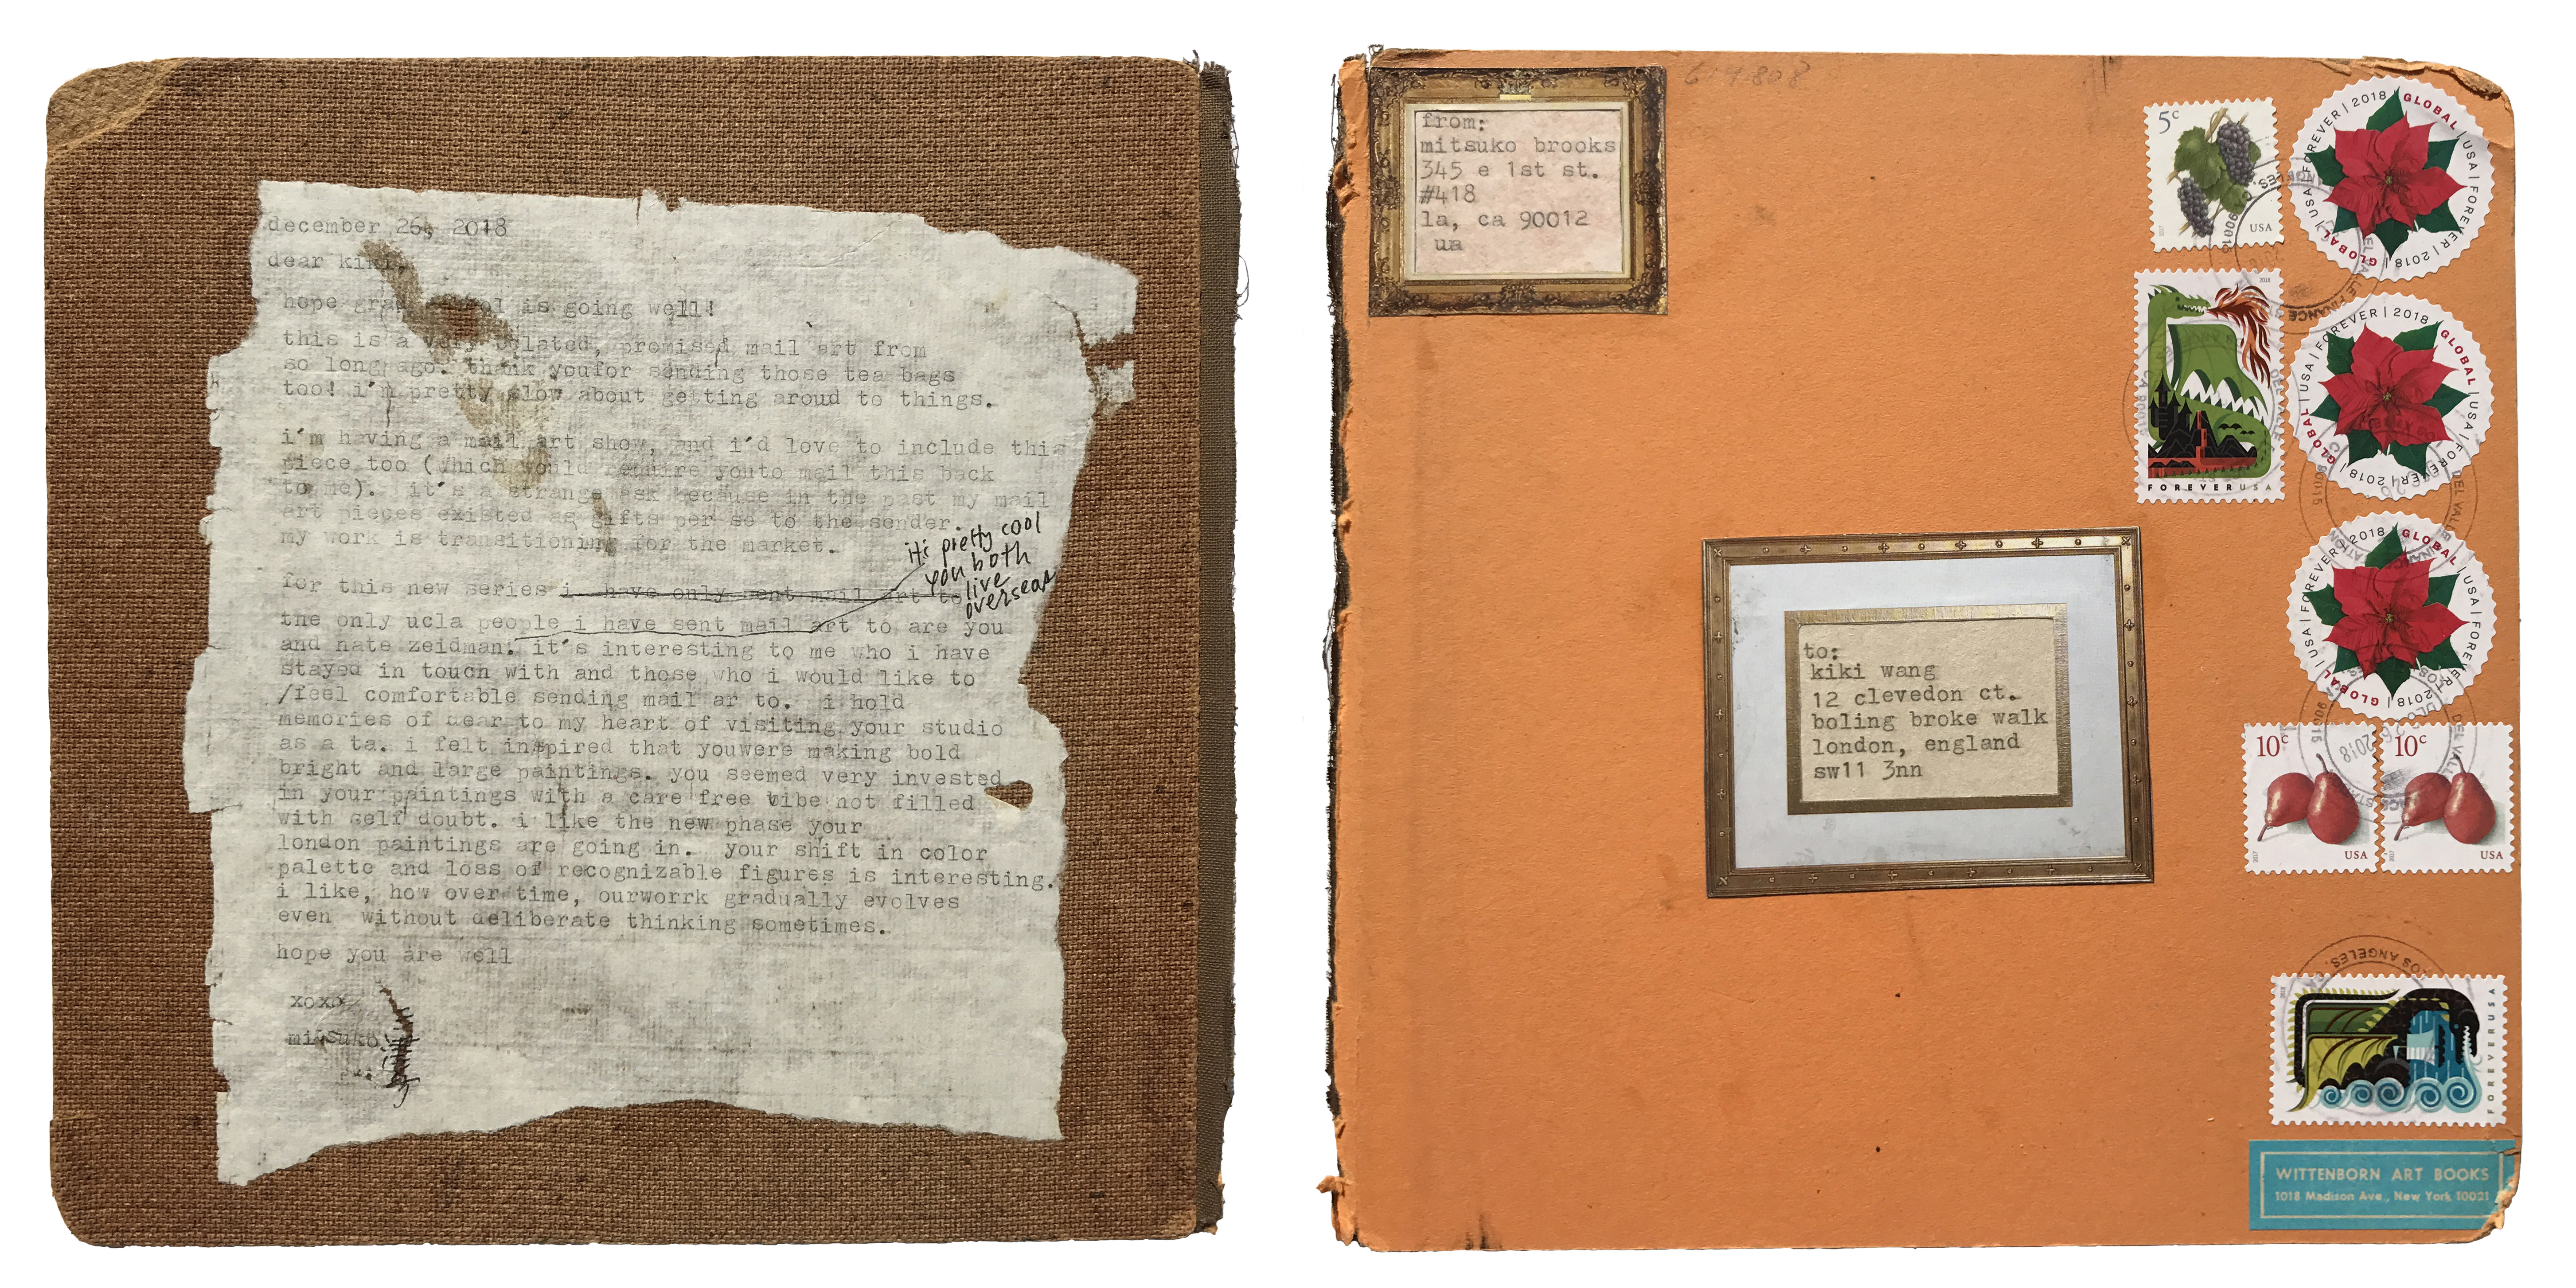 Mitsuko Brooks. <em>Mail to K.W., Dec. 26, 2018</em>, 2018. Ink, postage stamps, and paper collaged onto detached book cover, 8 1/8 x 8 inches (20.5 x 20.3 cm)